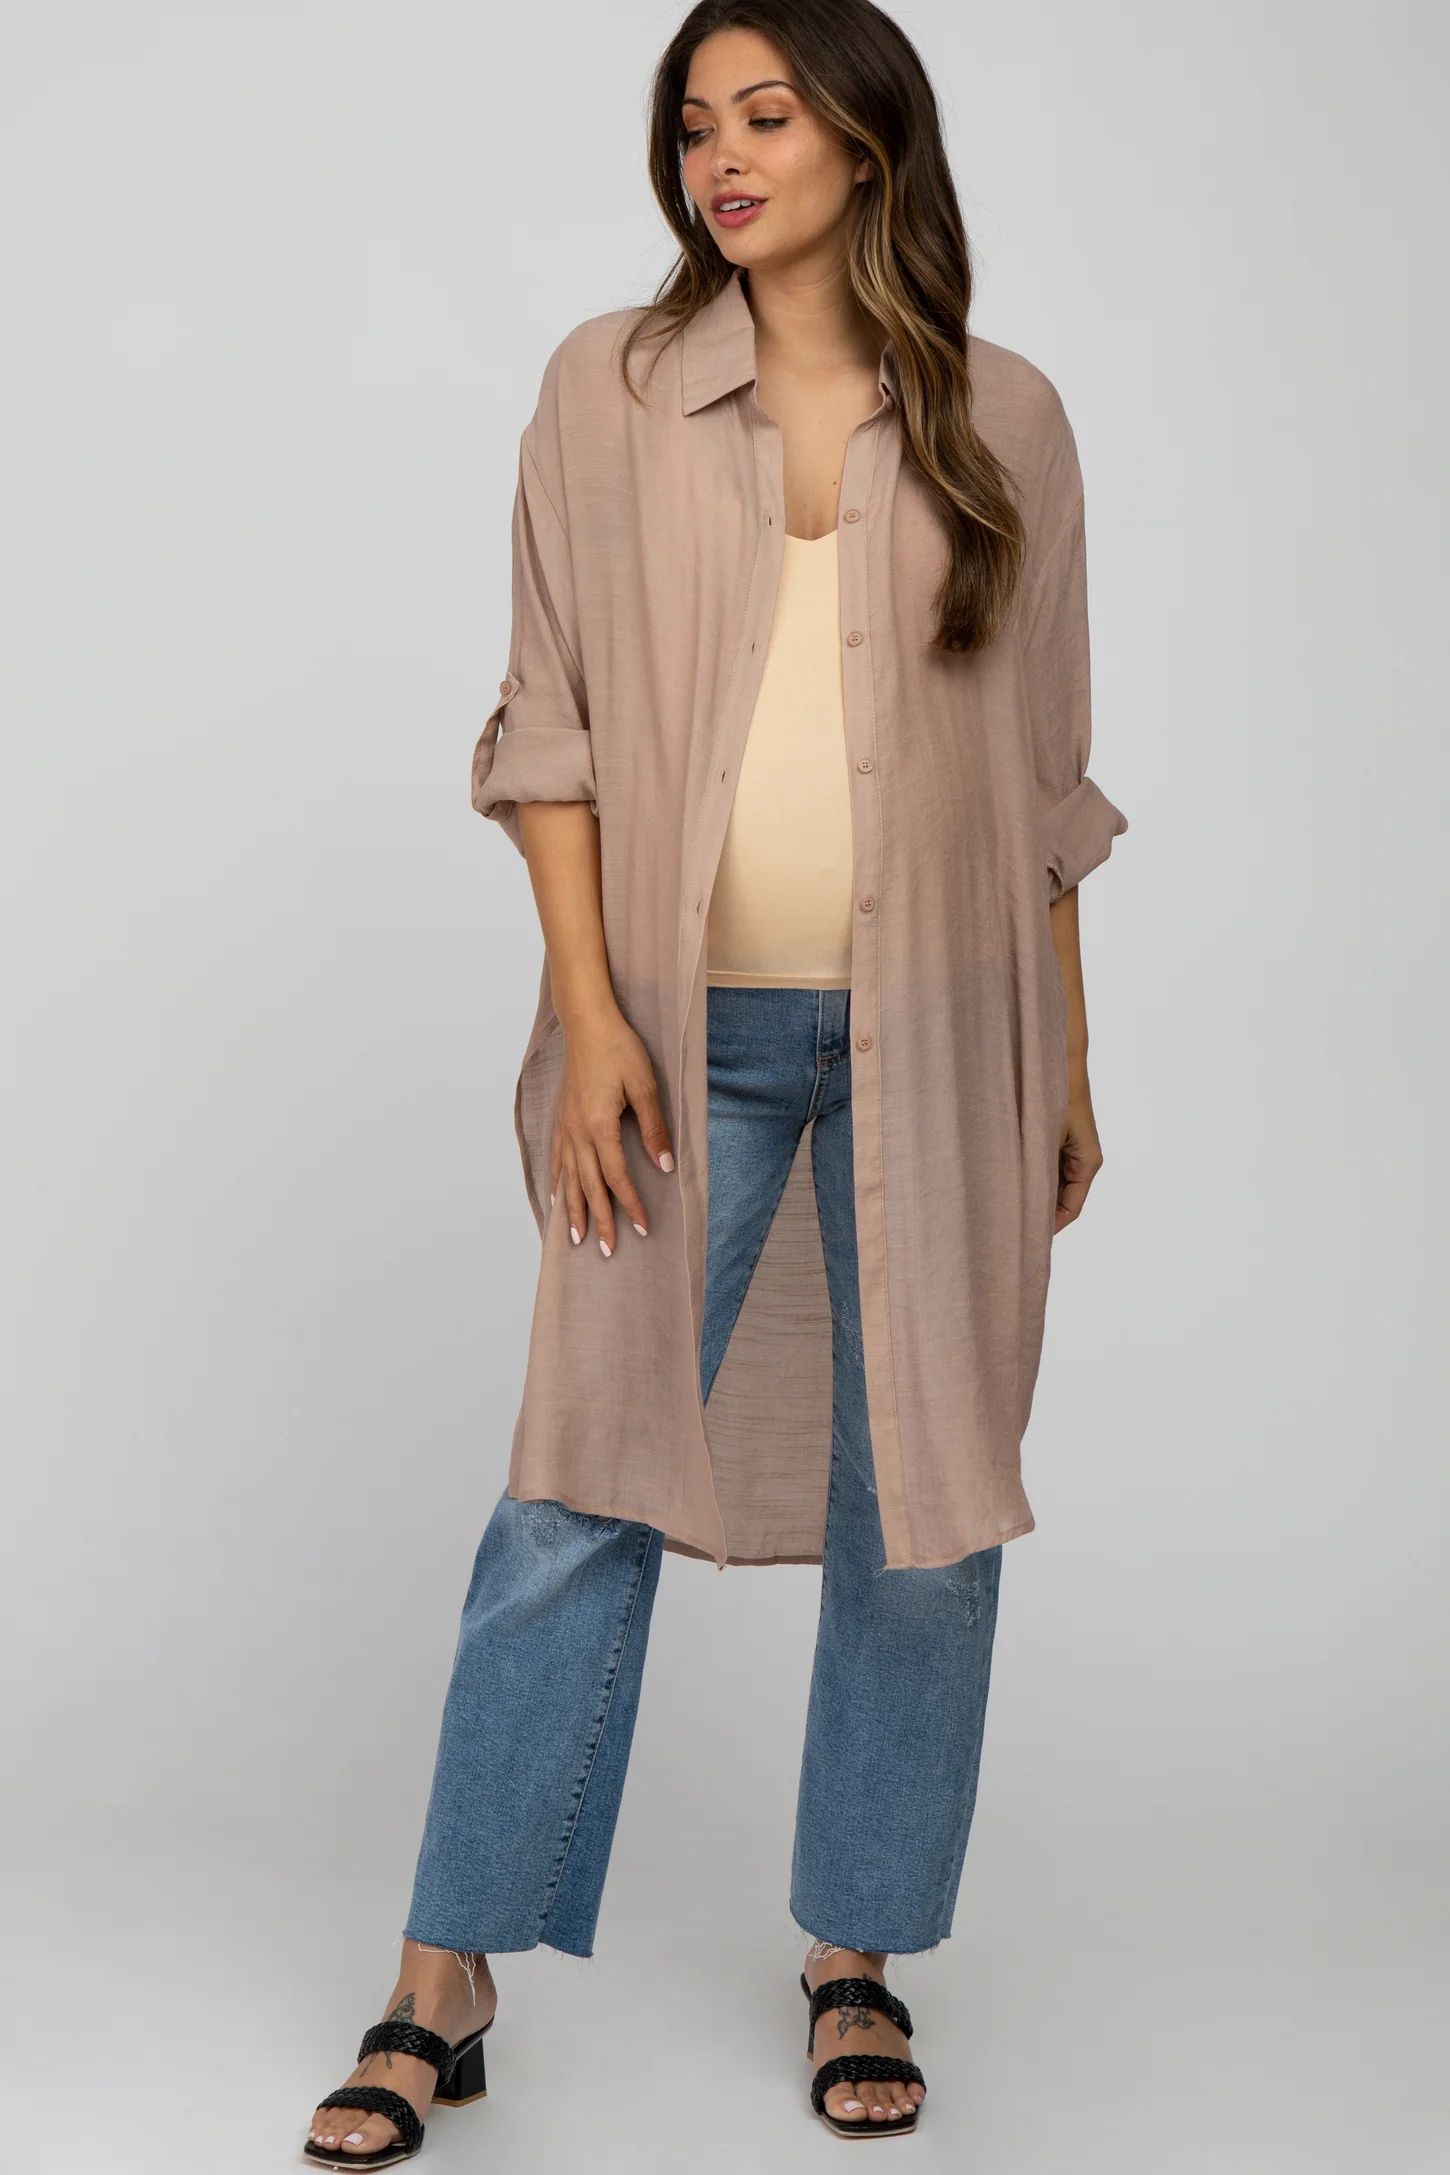 Taupe Button Front Side Slit Oversized Maternity Blouse | PinkBlush Maternity